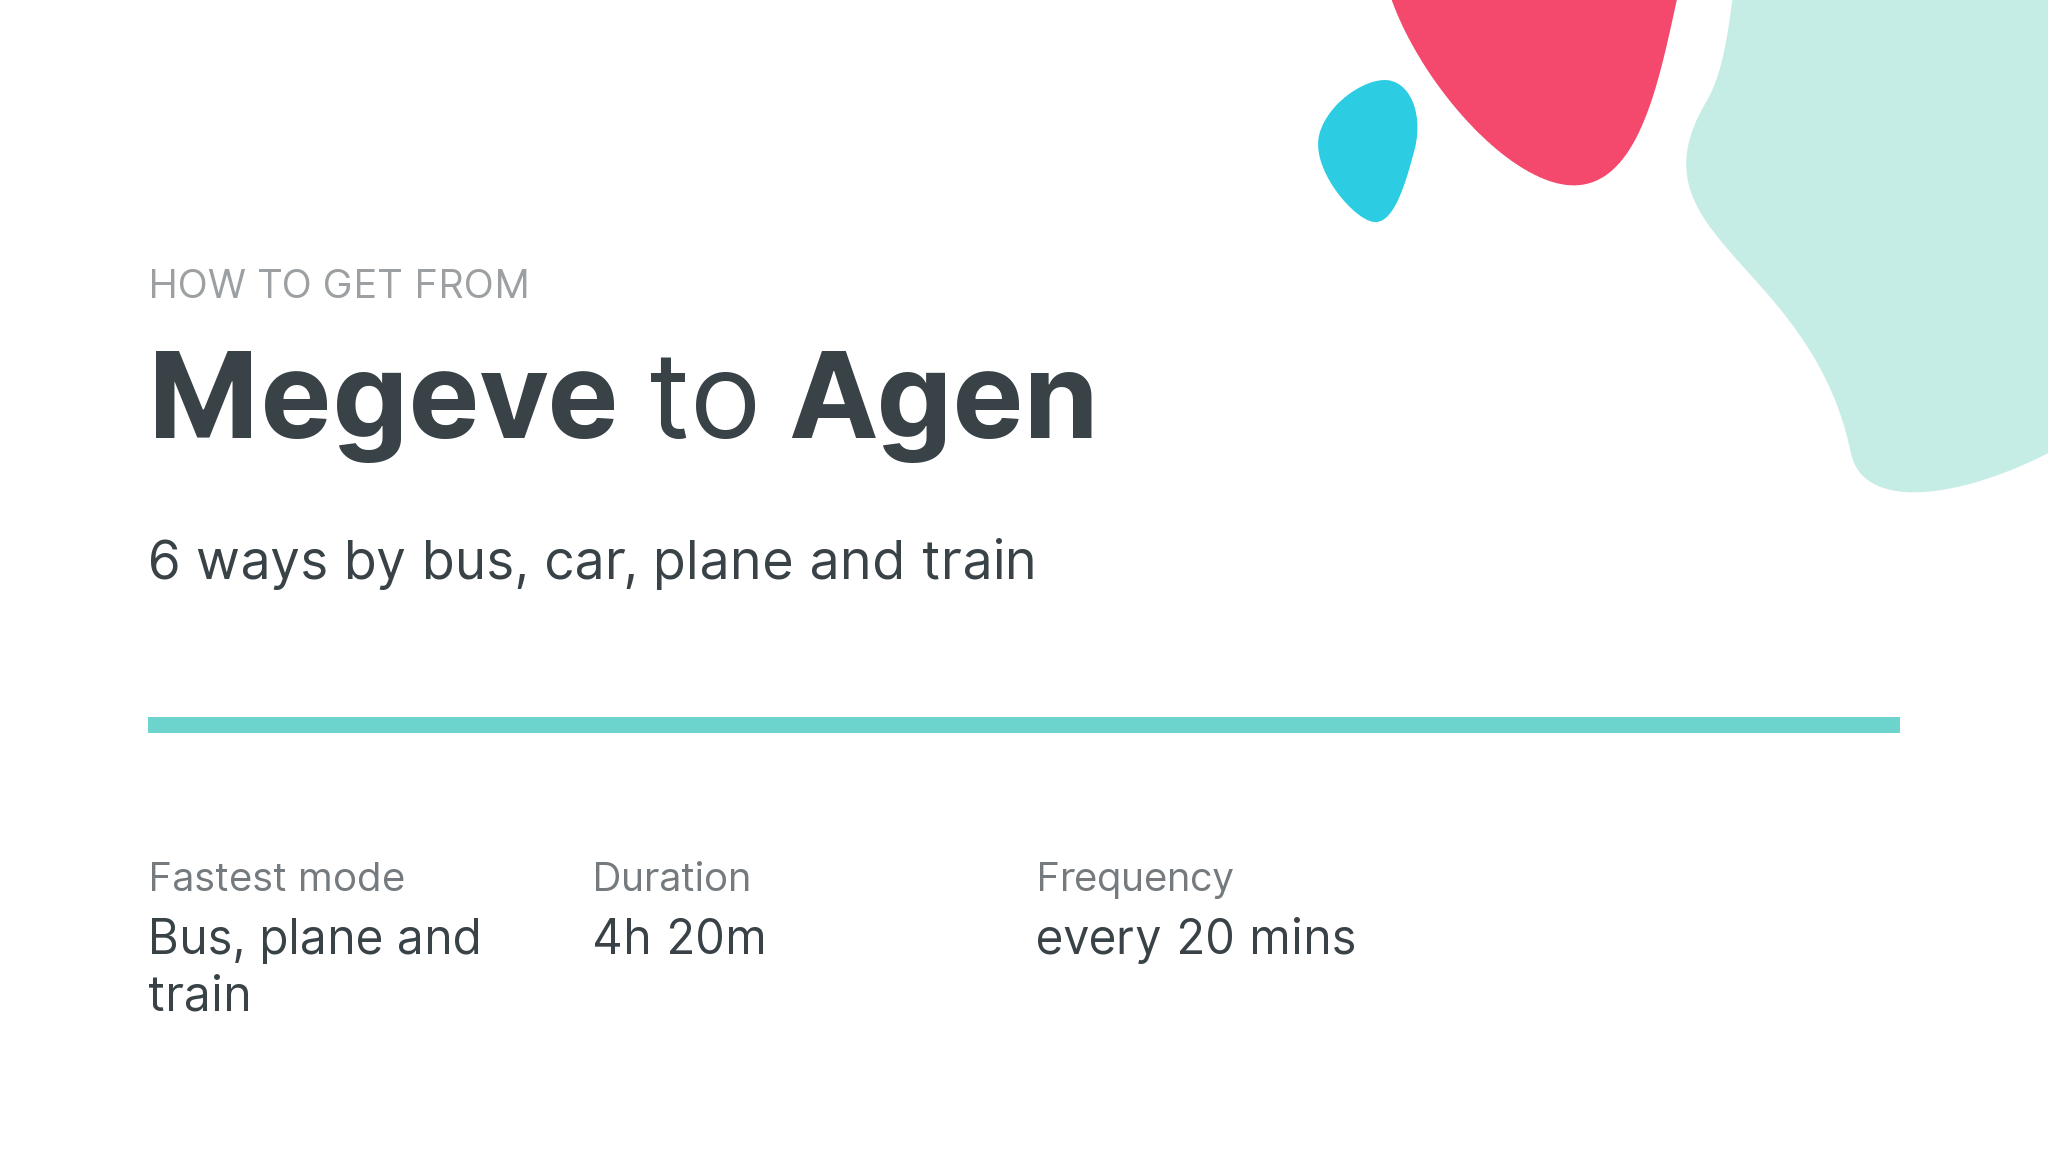 How do I get from Megeve to Agen